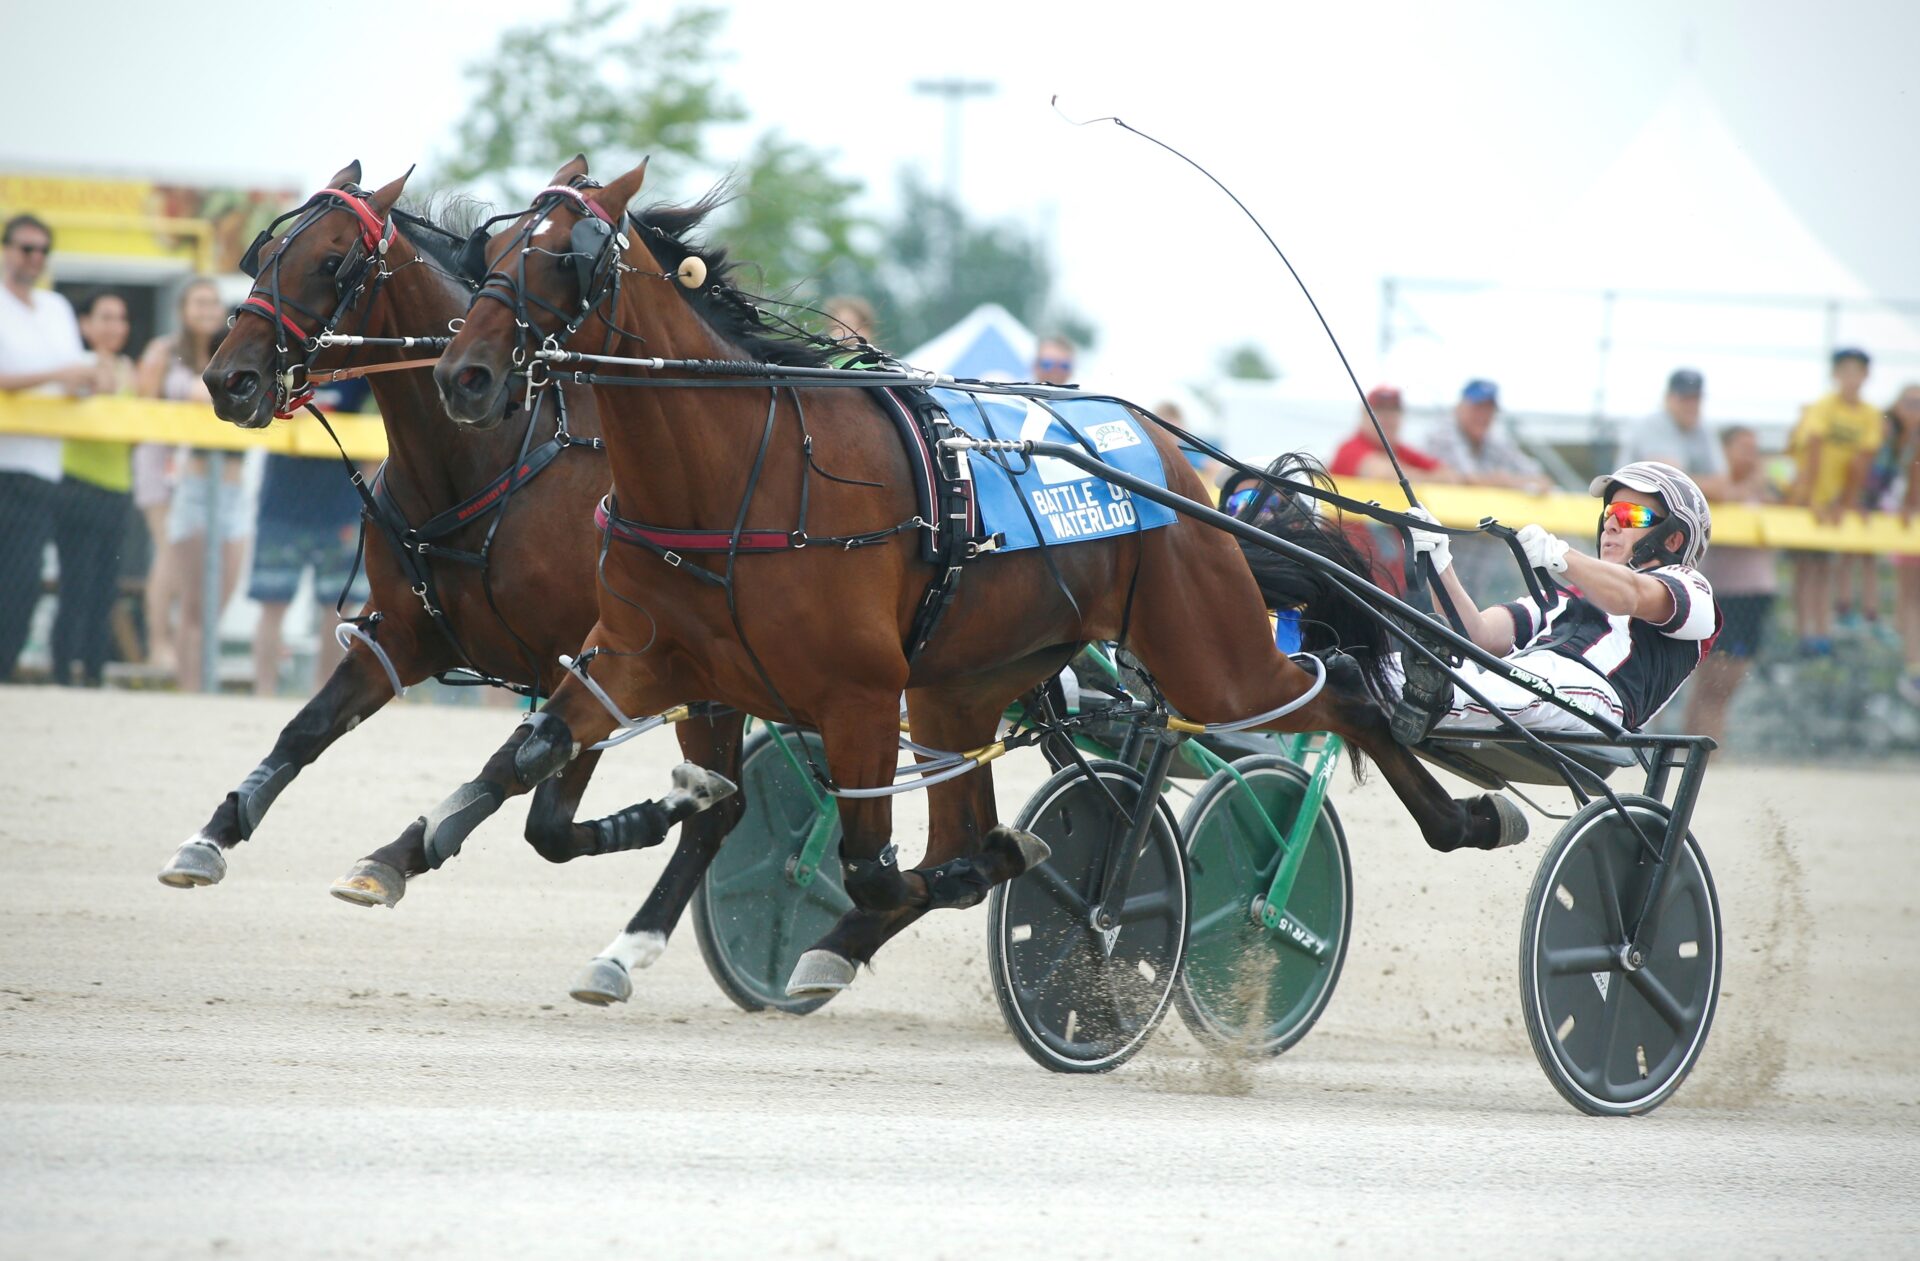 two standardbred horses neck to neck racing